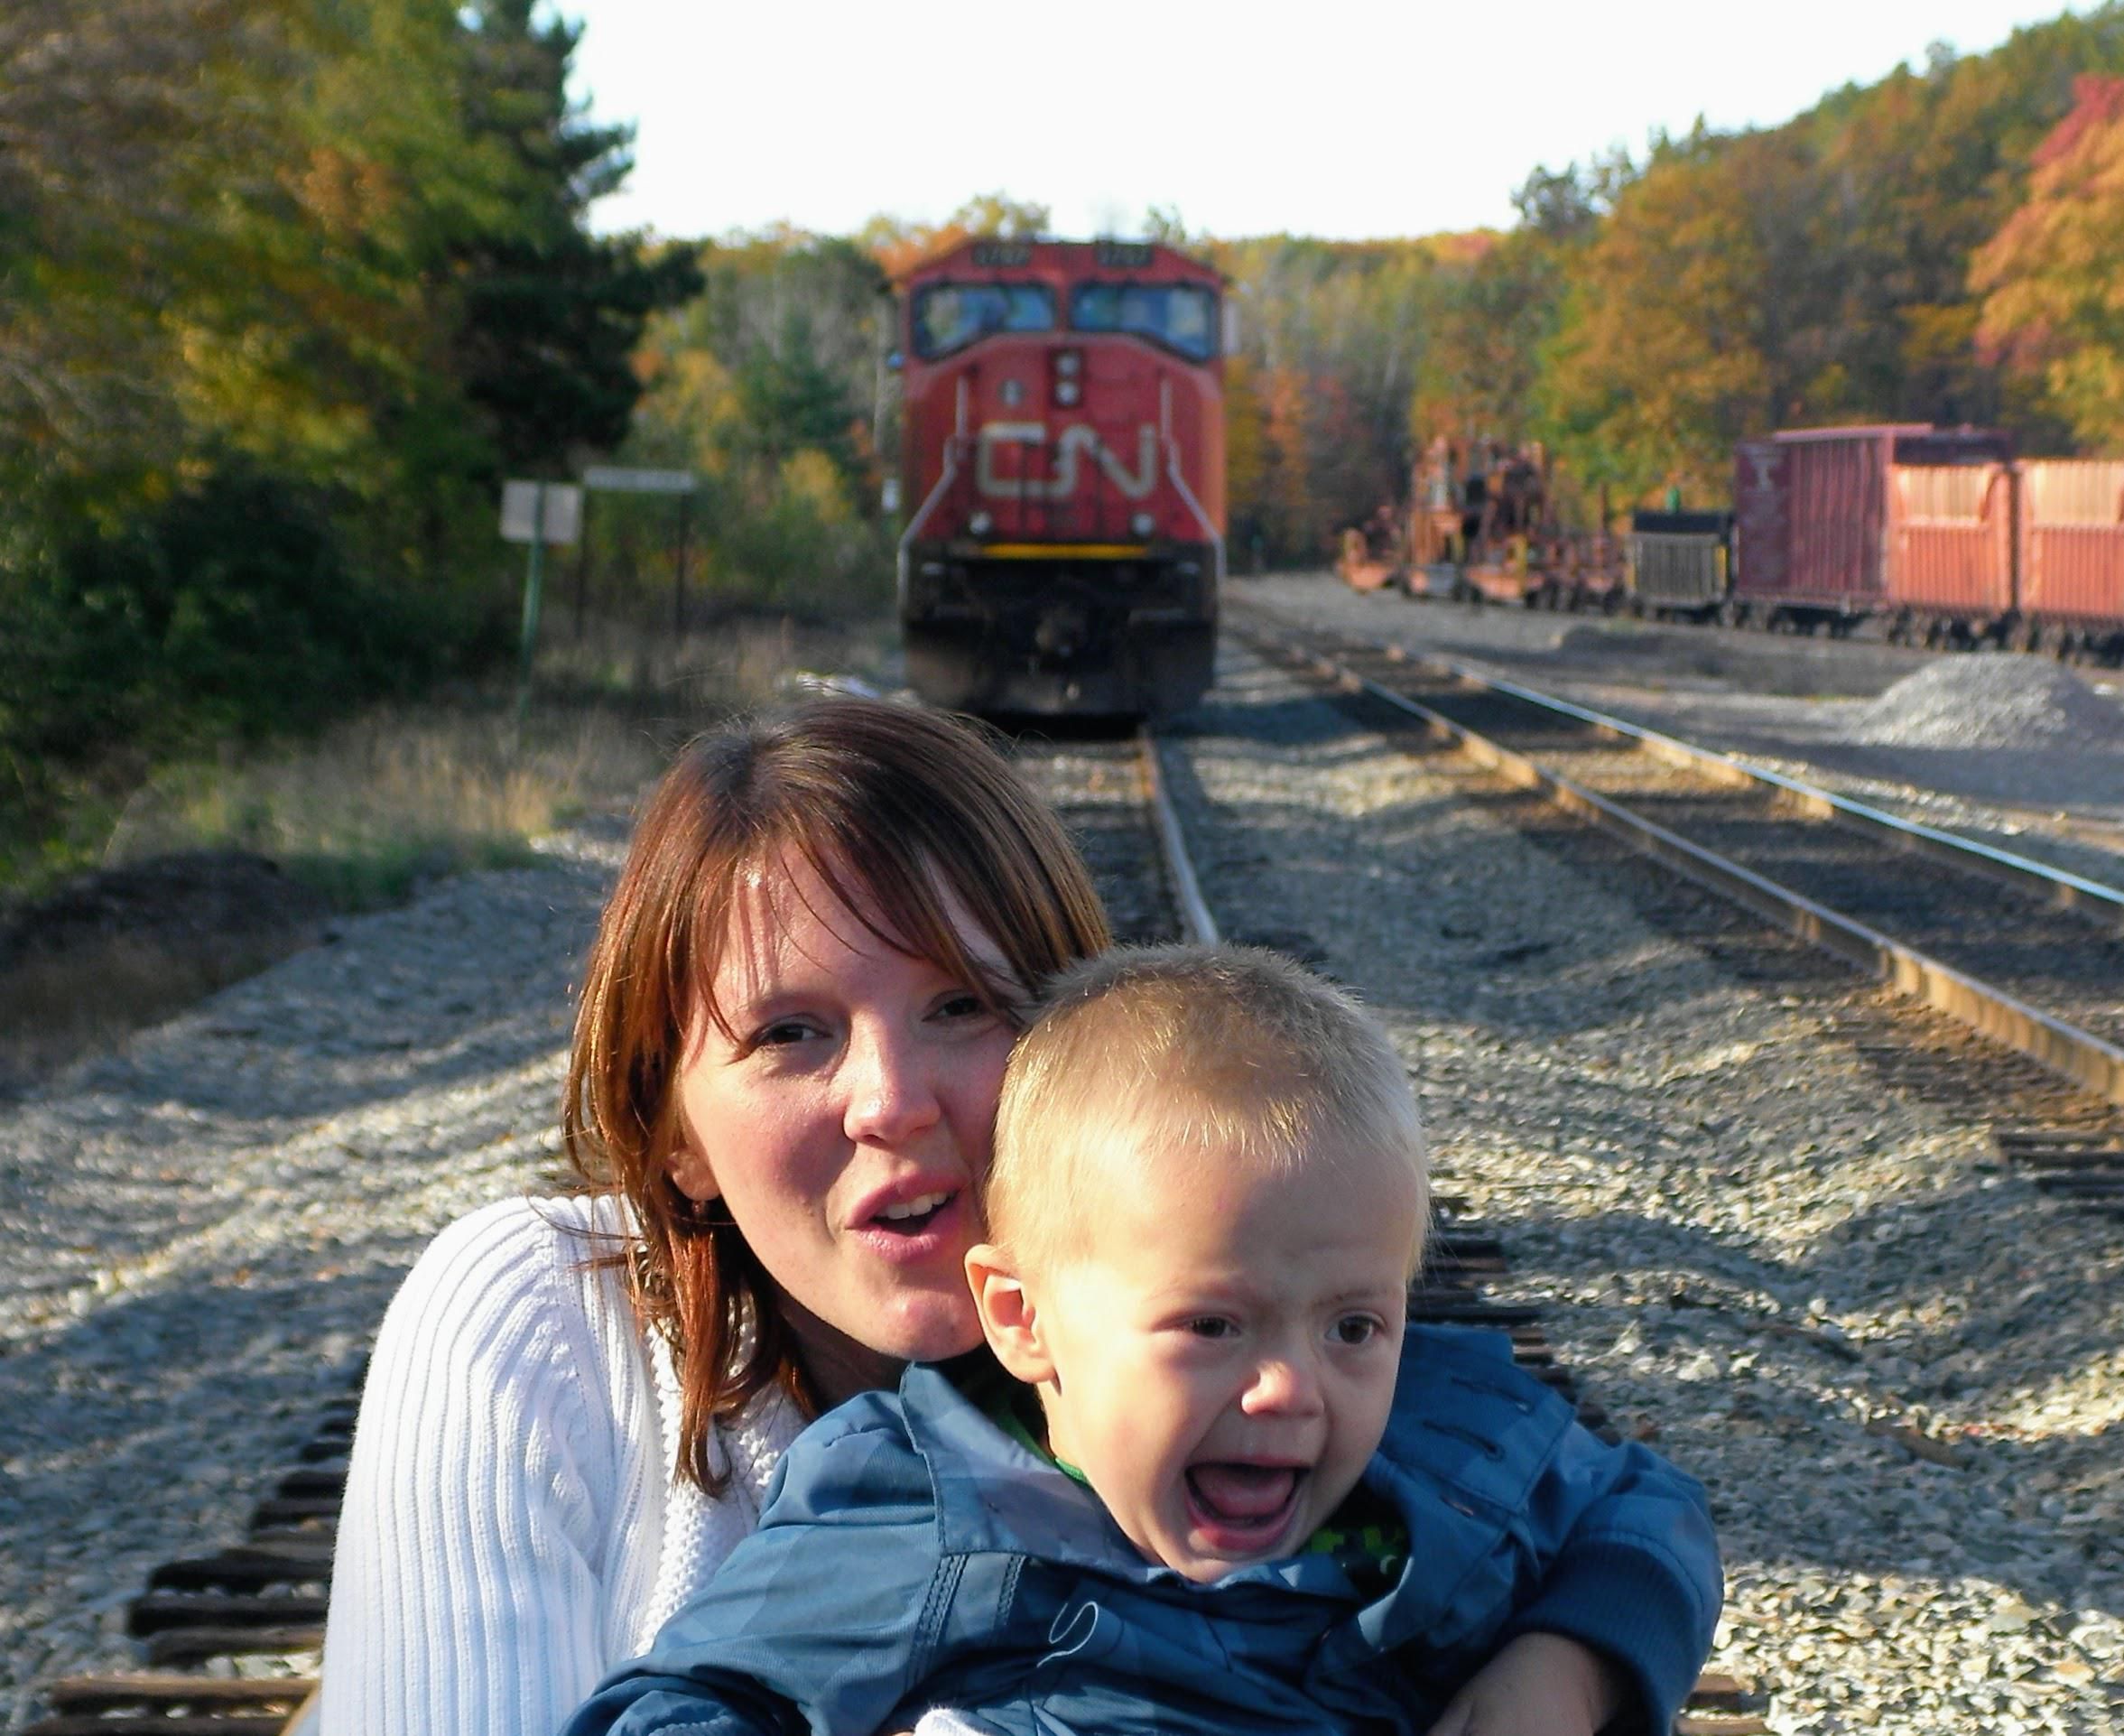 This was supposed to be a cute photo op of my wife and son at the train yard.